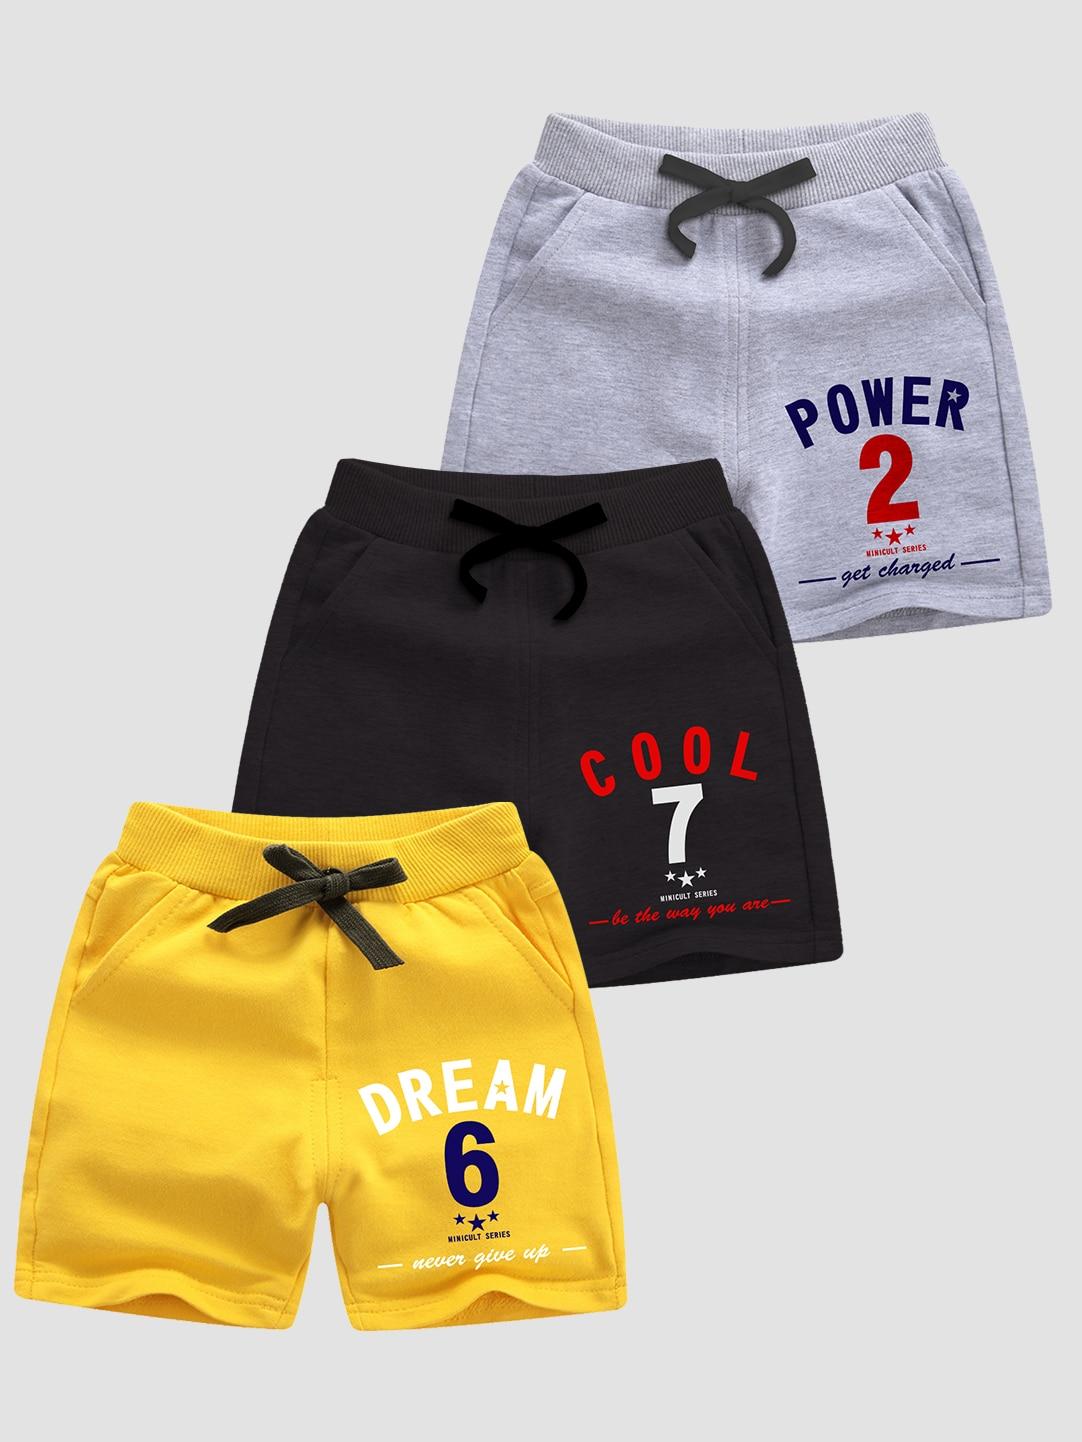 x2o-boys-pack-of-3-yellow-&-grey-typography-printed-outdoor-shorts